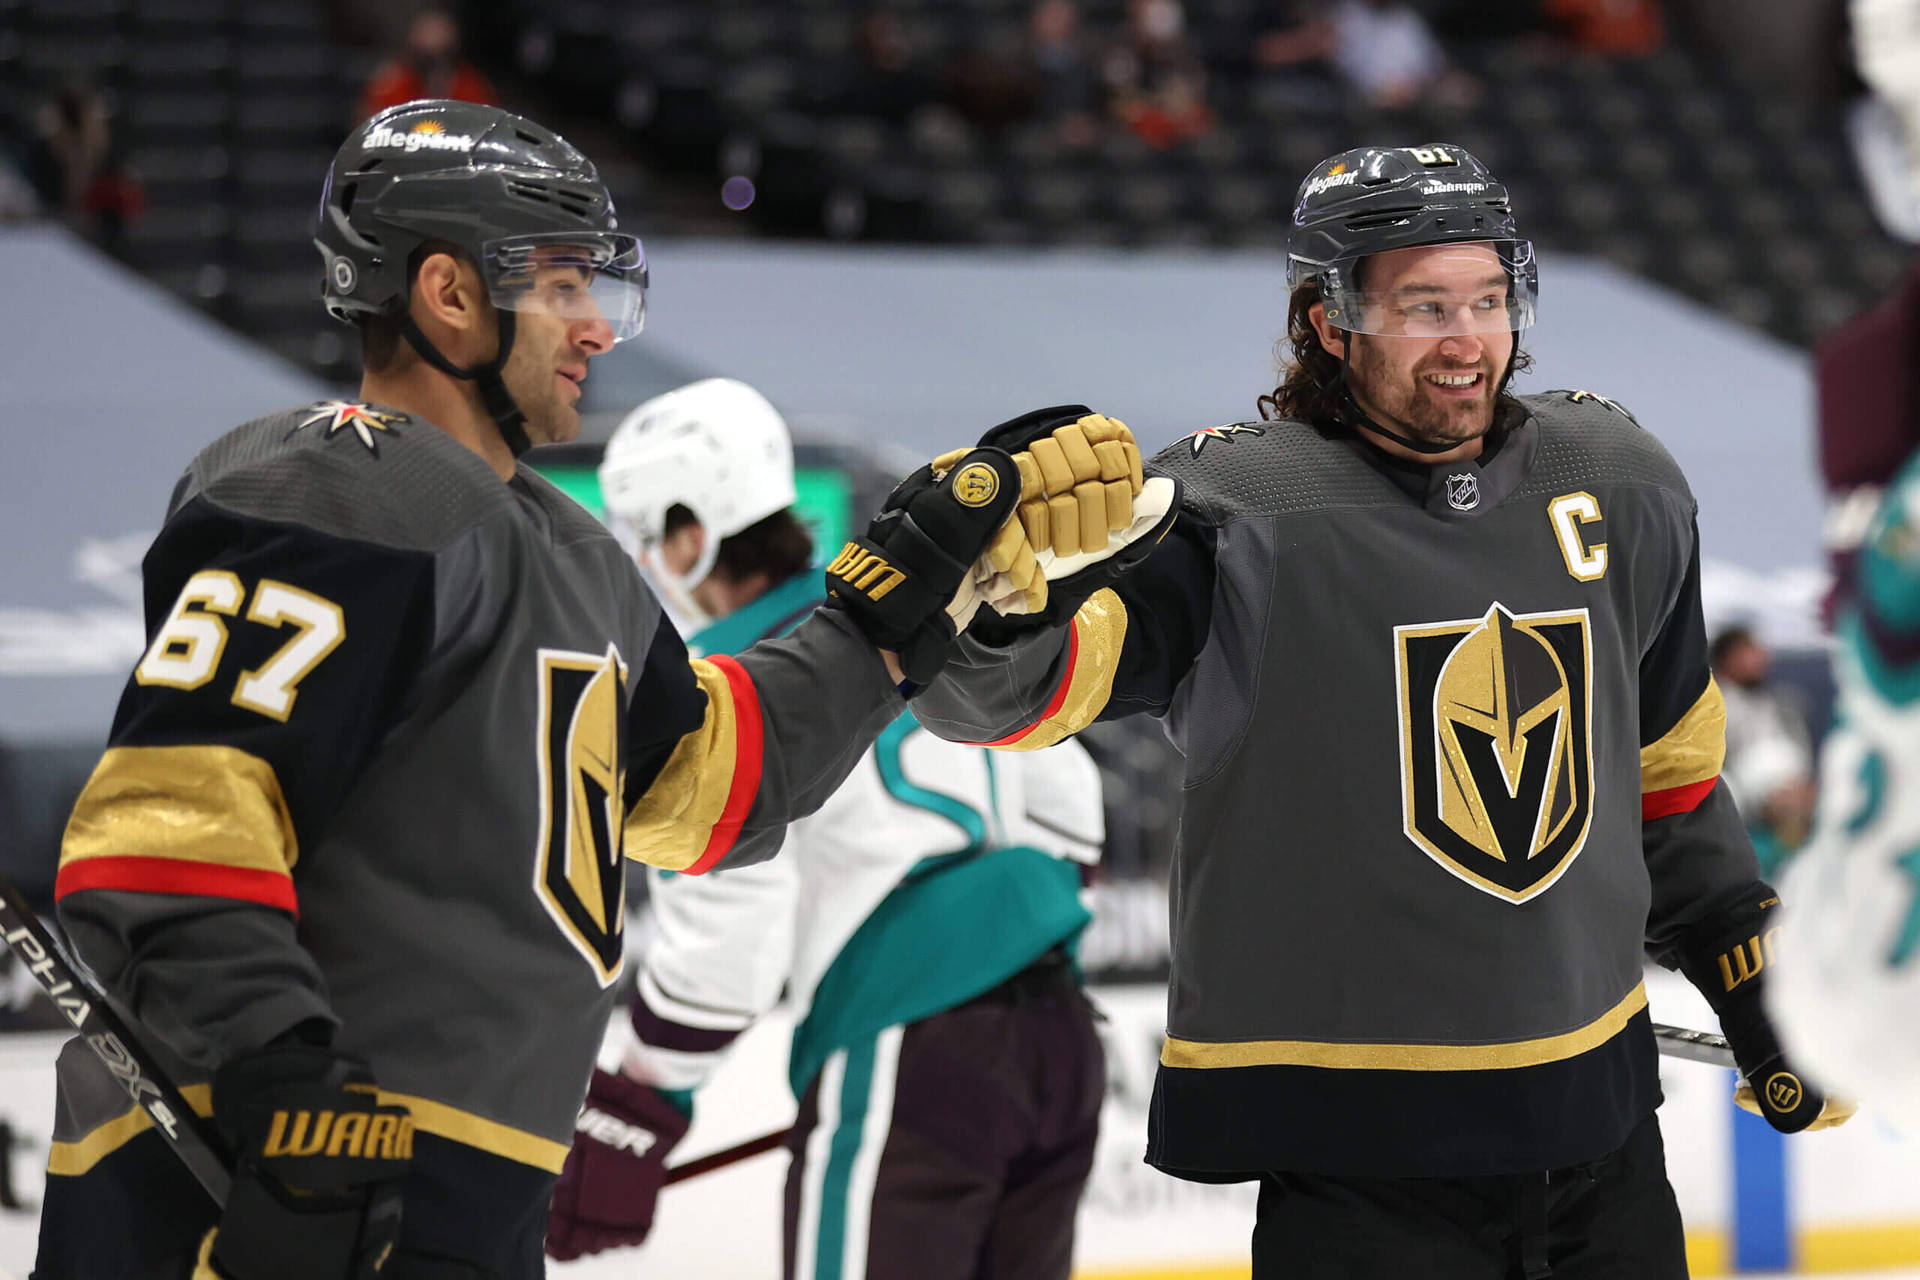 Vegas Golden Knights Players Max Pacioretty And Mark Stone Photograph Wallpaper